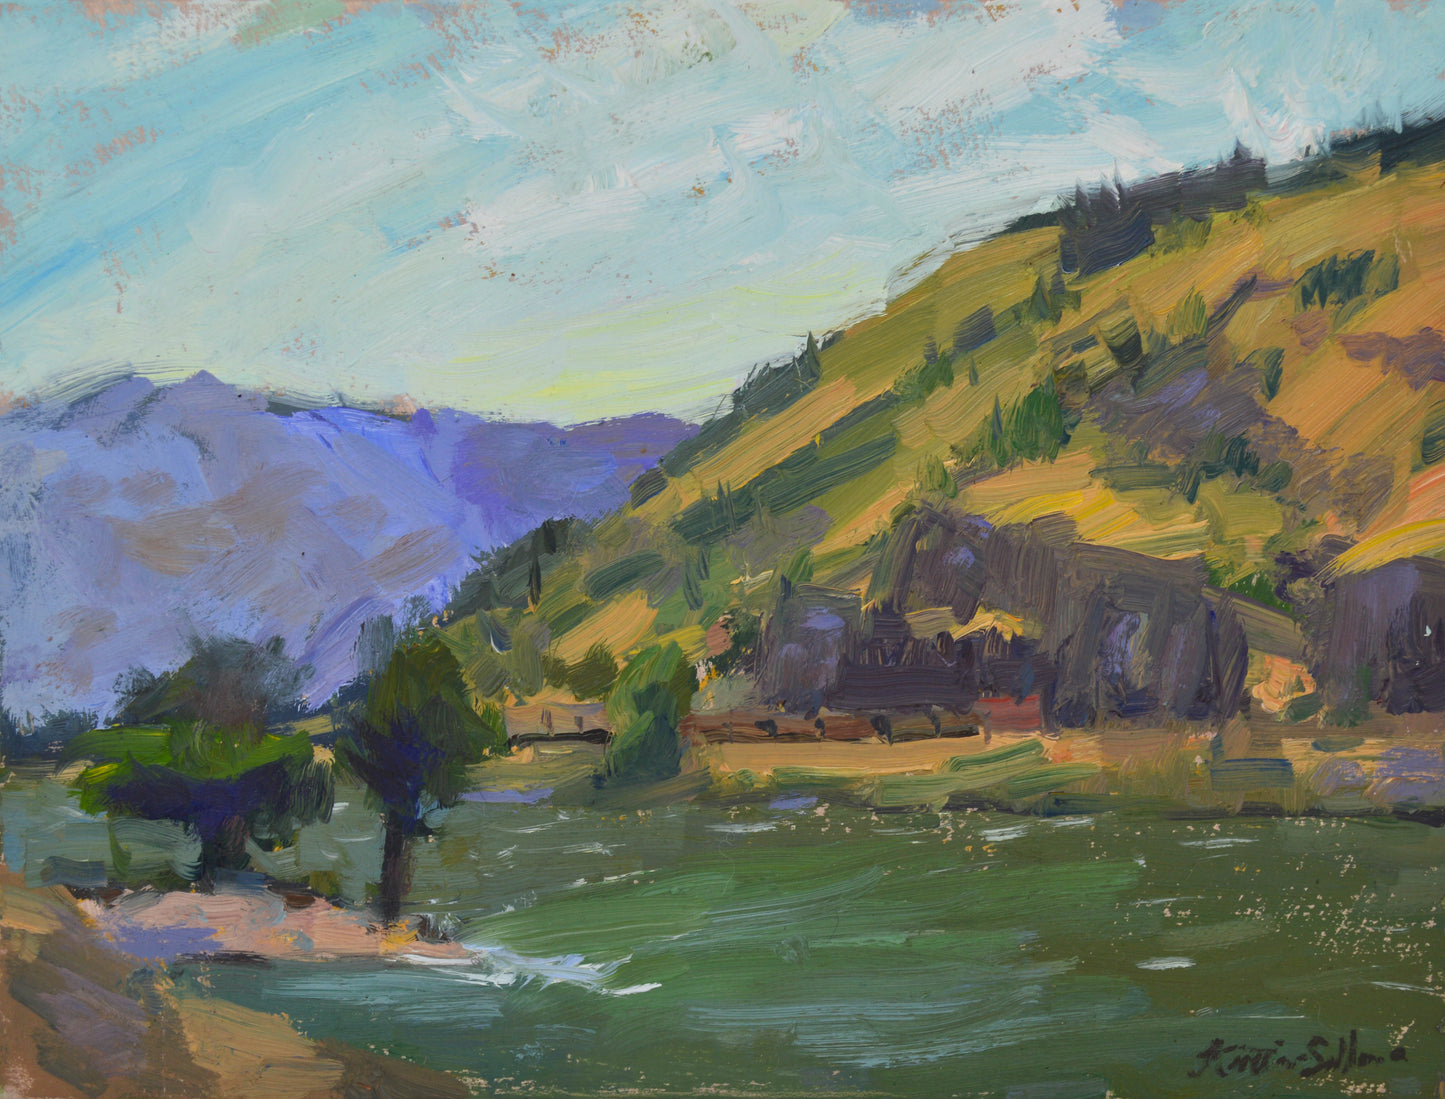 "Winds of Mosier" 9x12 original oil painting by Artist Kristina Sellers